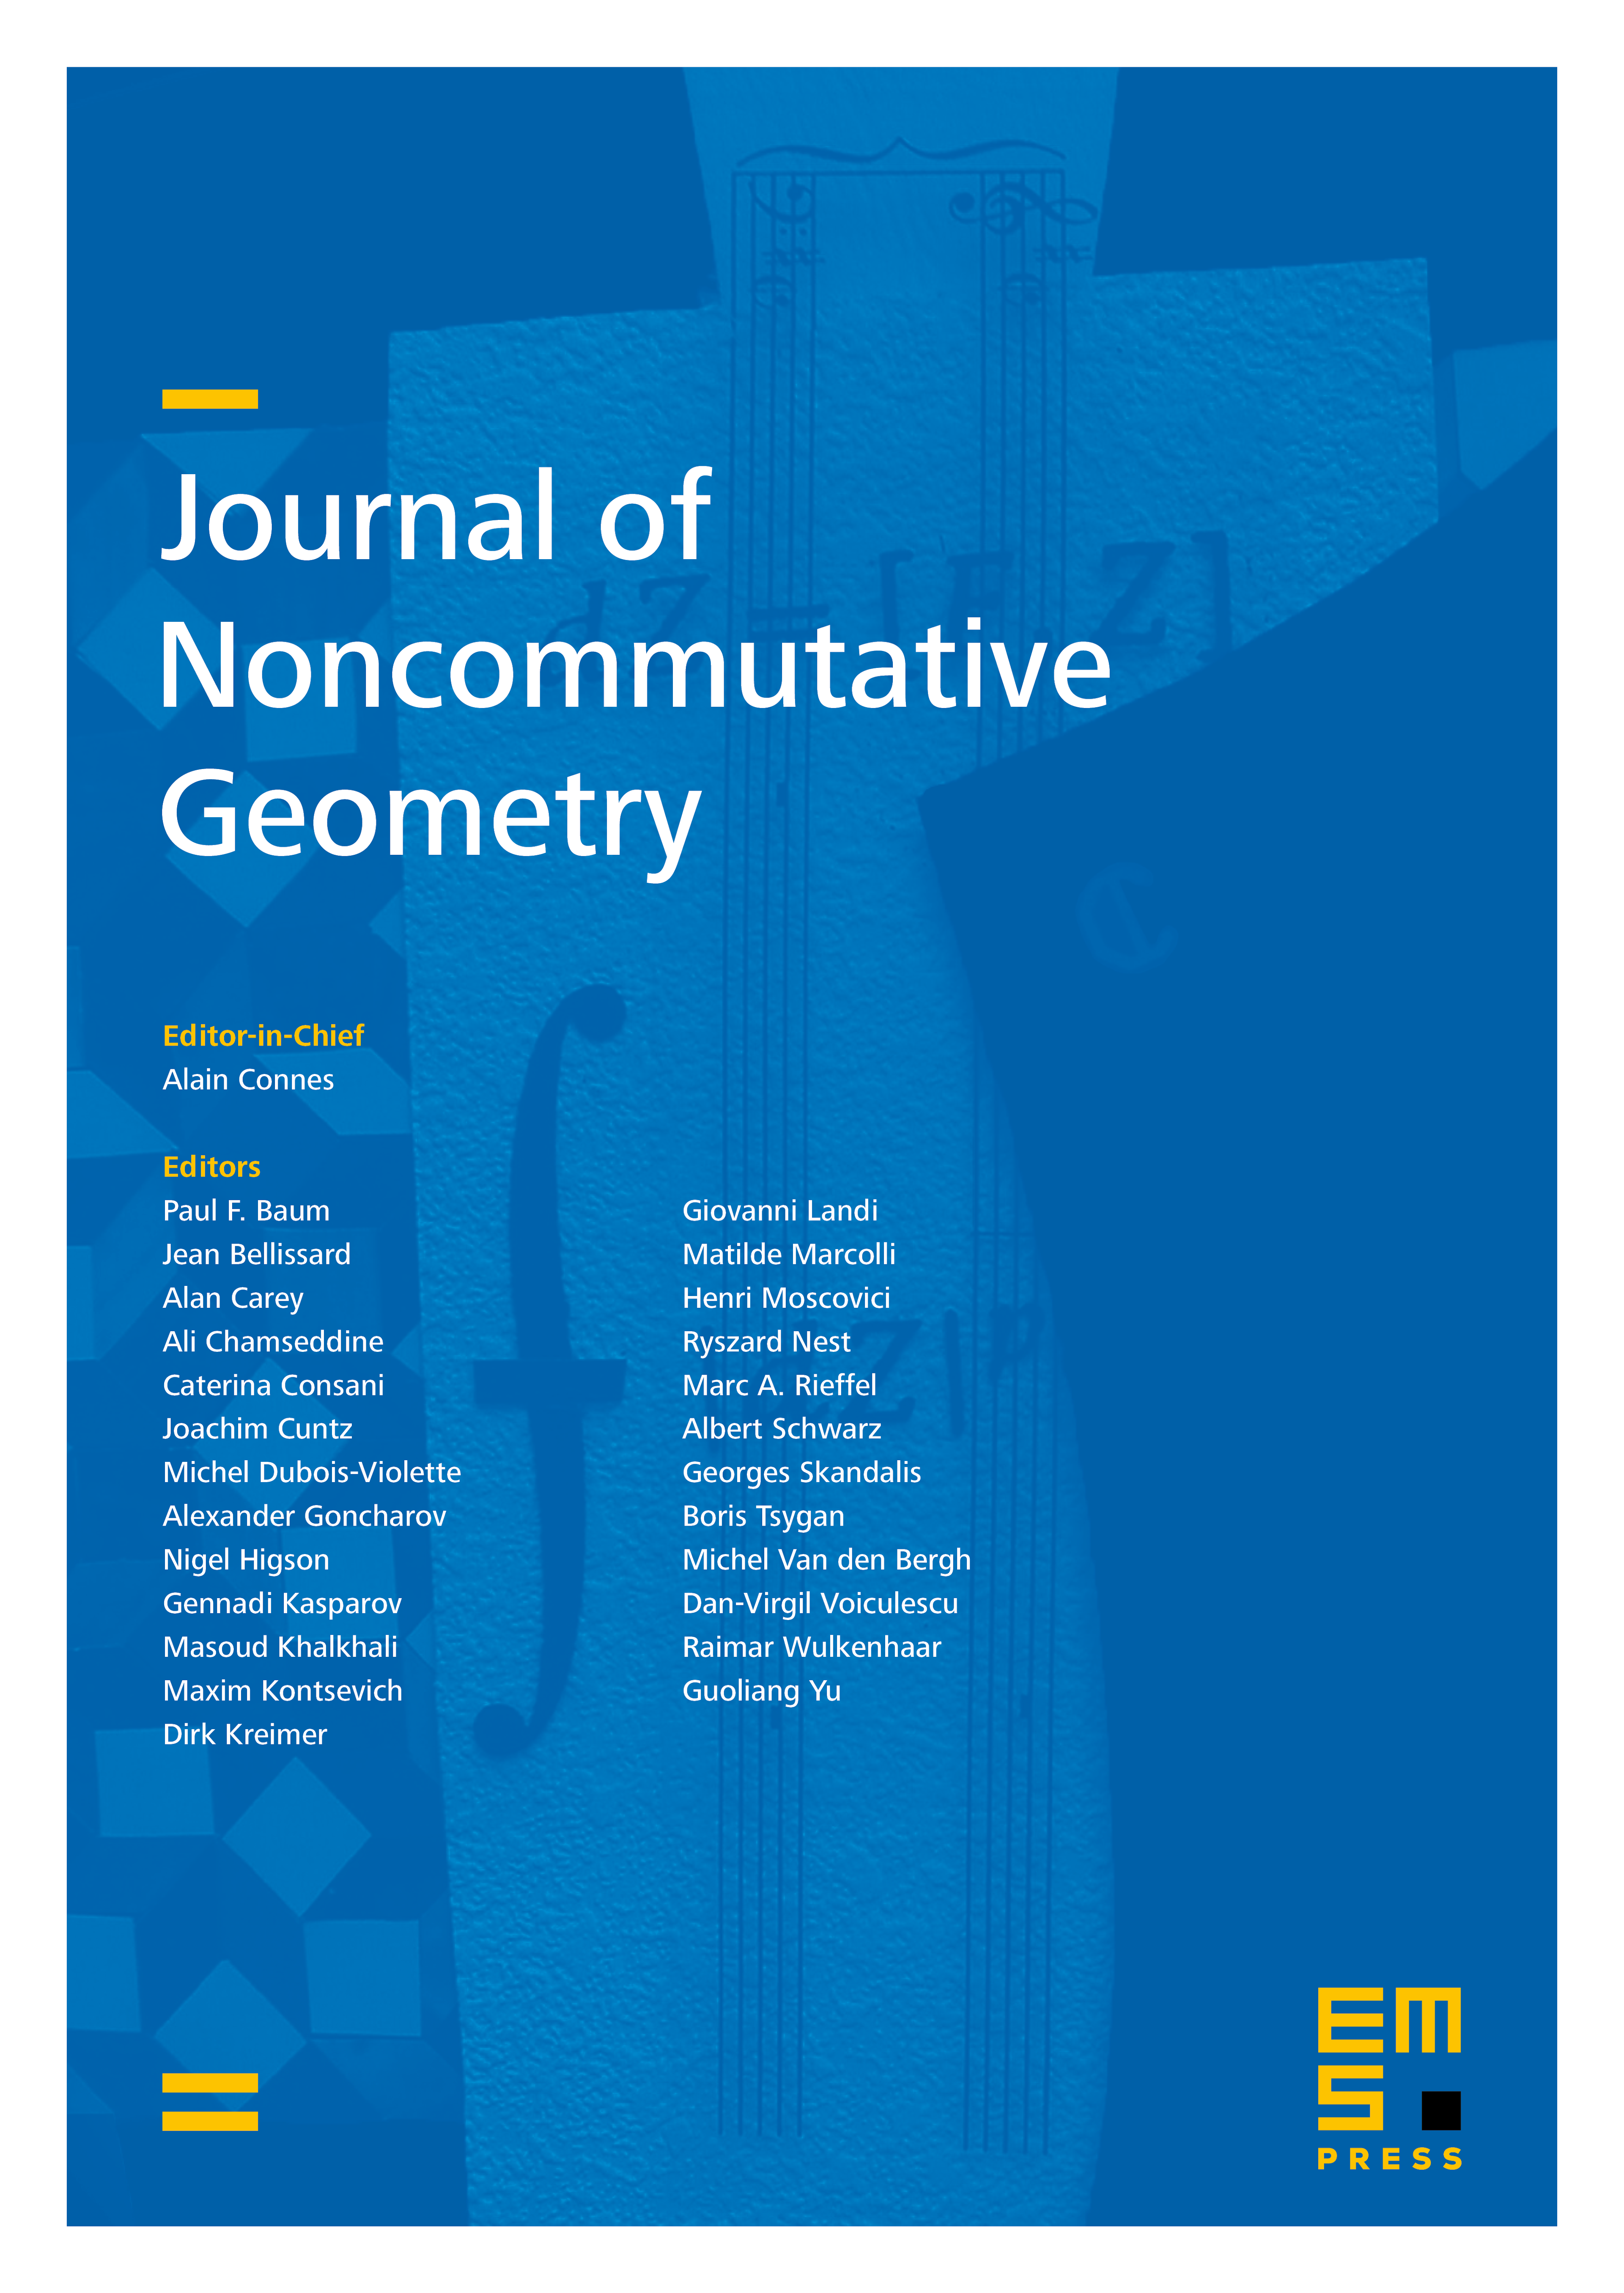 Measurability, spectral densities, and hypertraces in noncommutative geometry cover